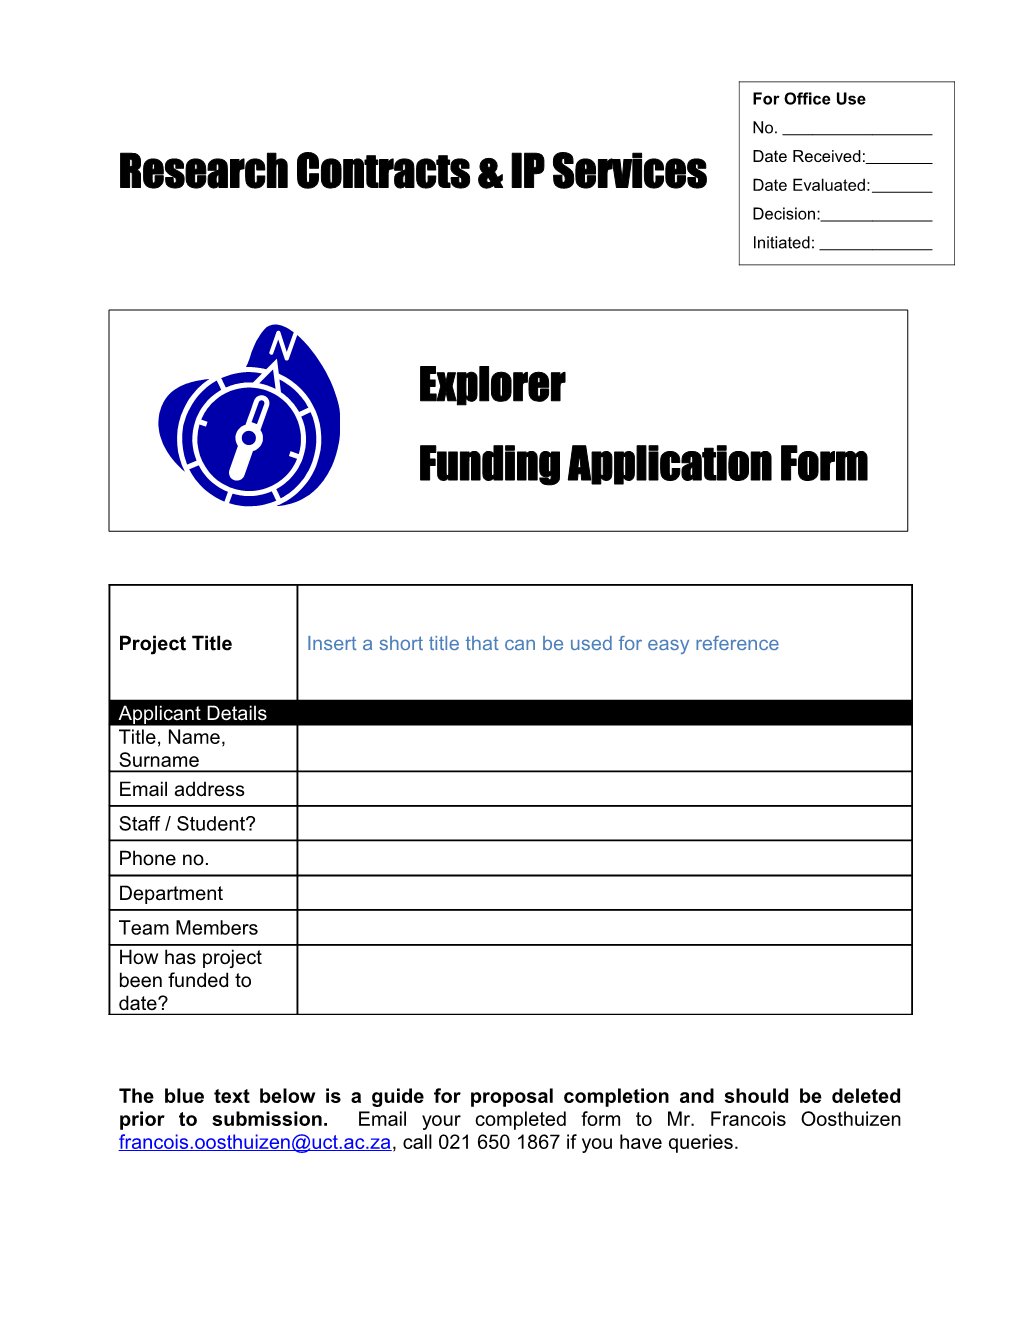 Research Contracts & IP Services